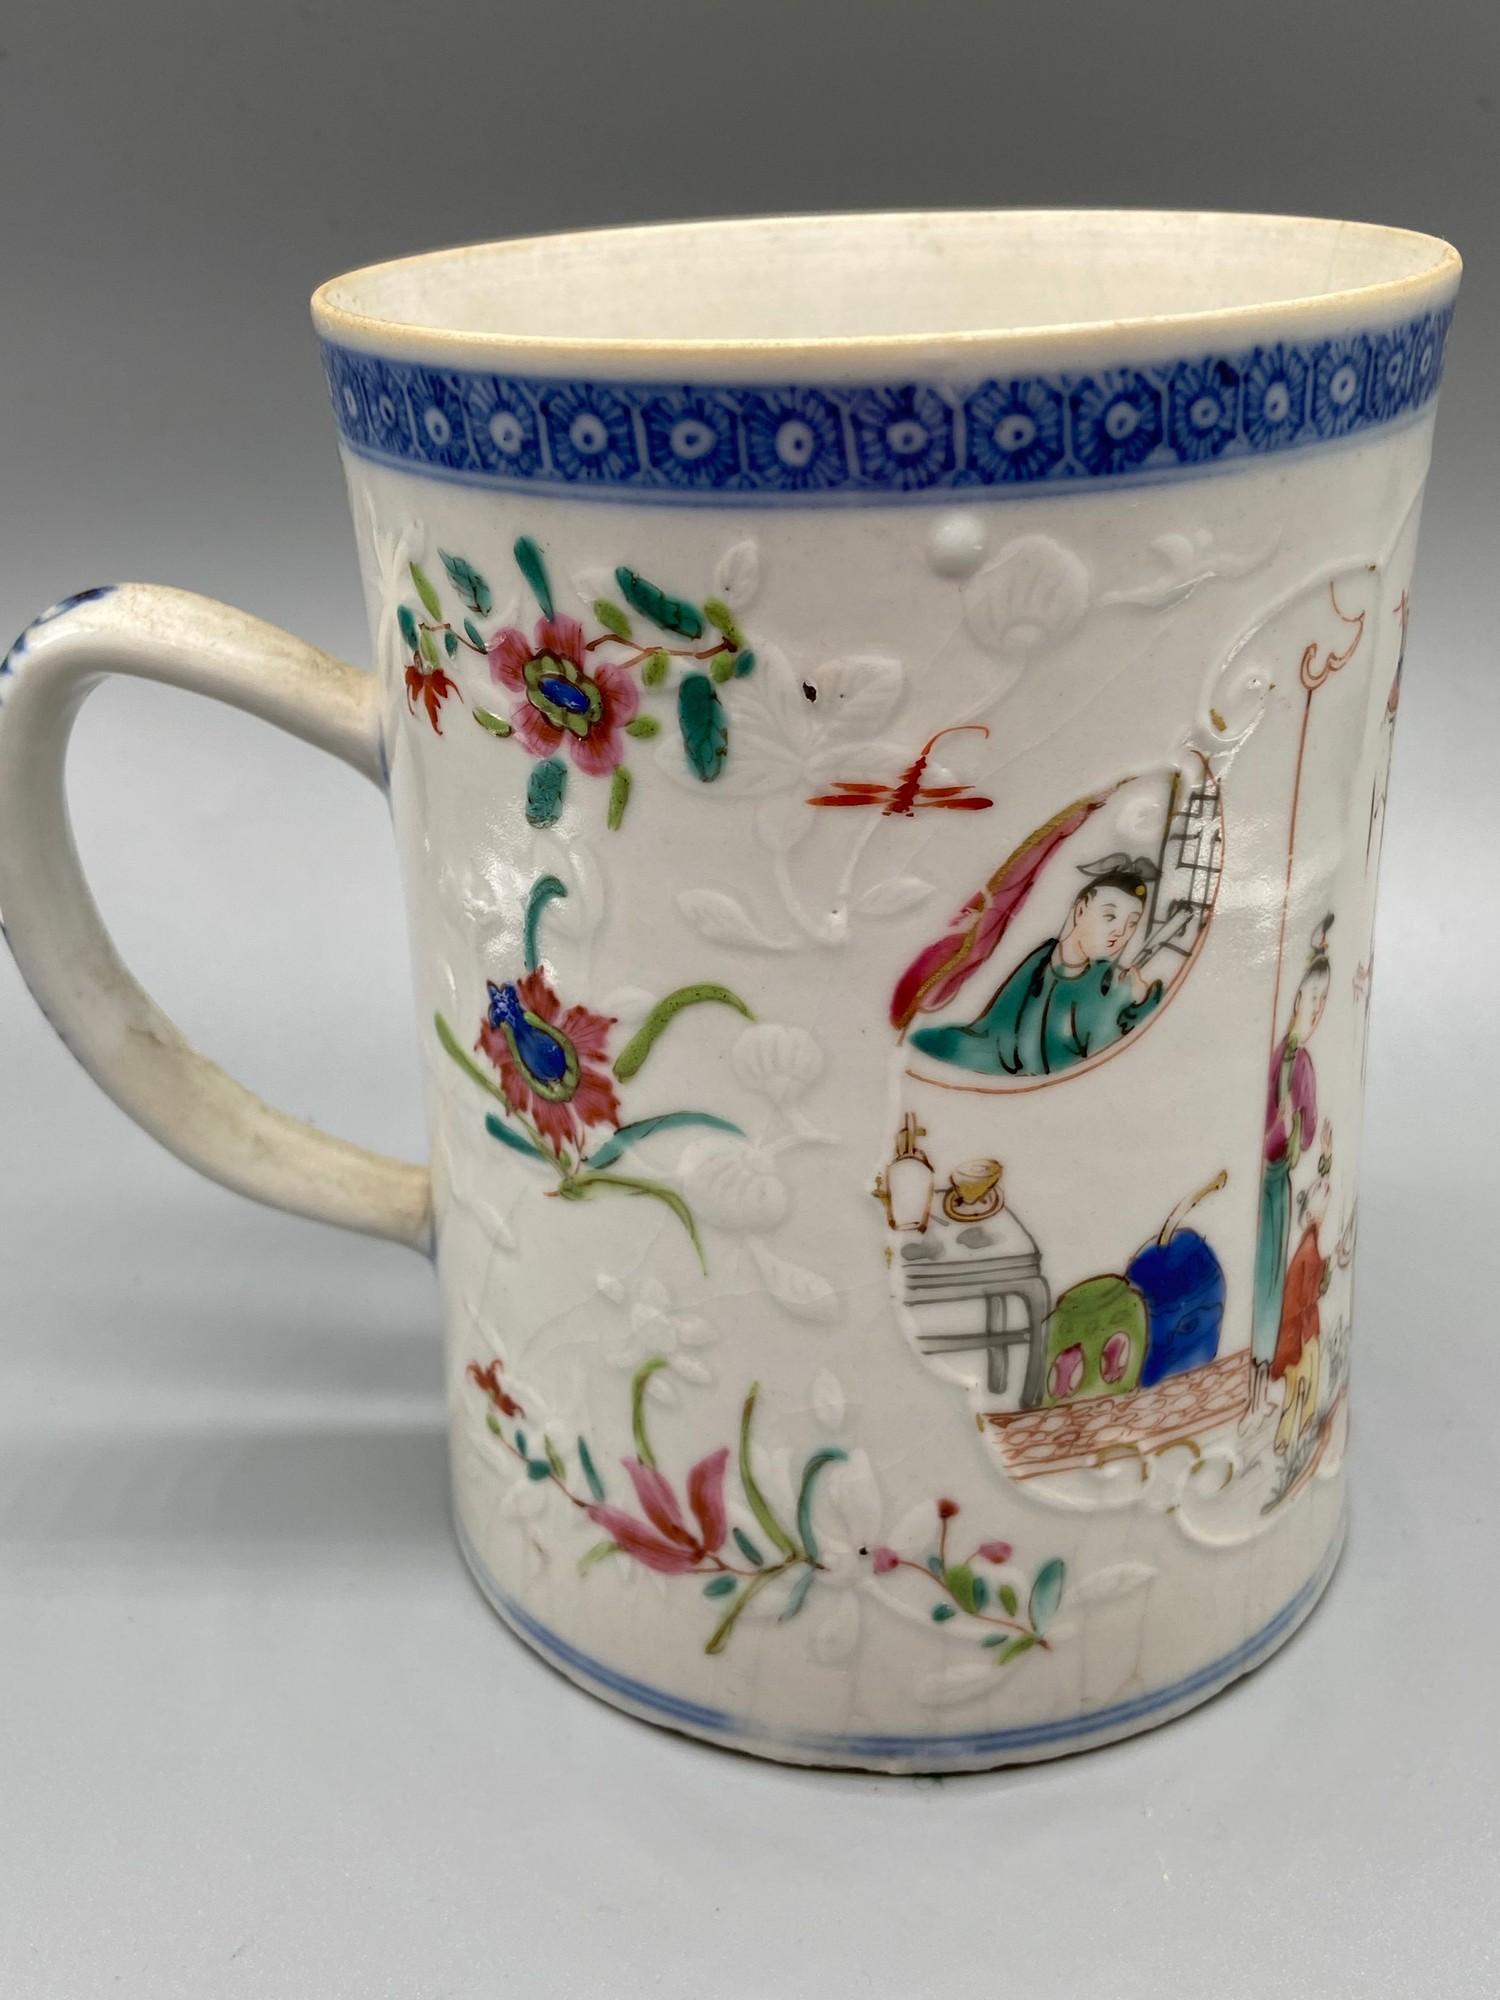 A large 19th century Chinese hand painted mug. Detailed with various hand painted figures and - Image 4 of 7